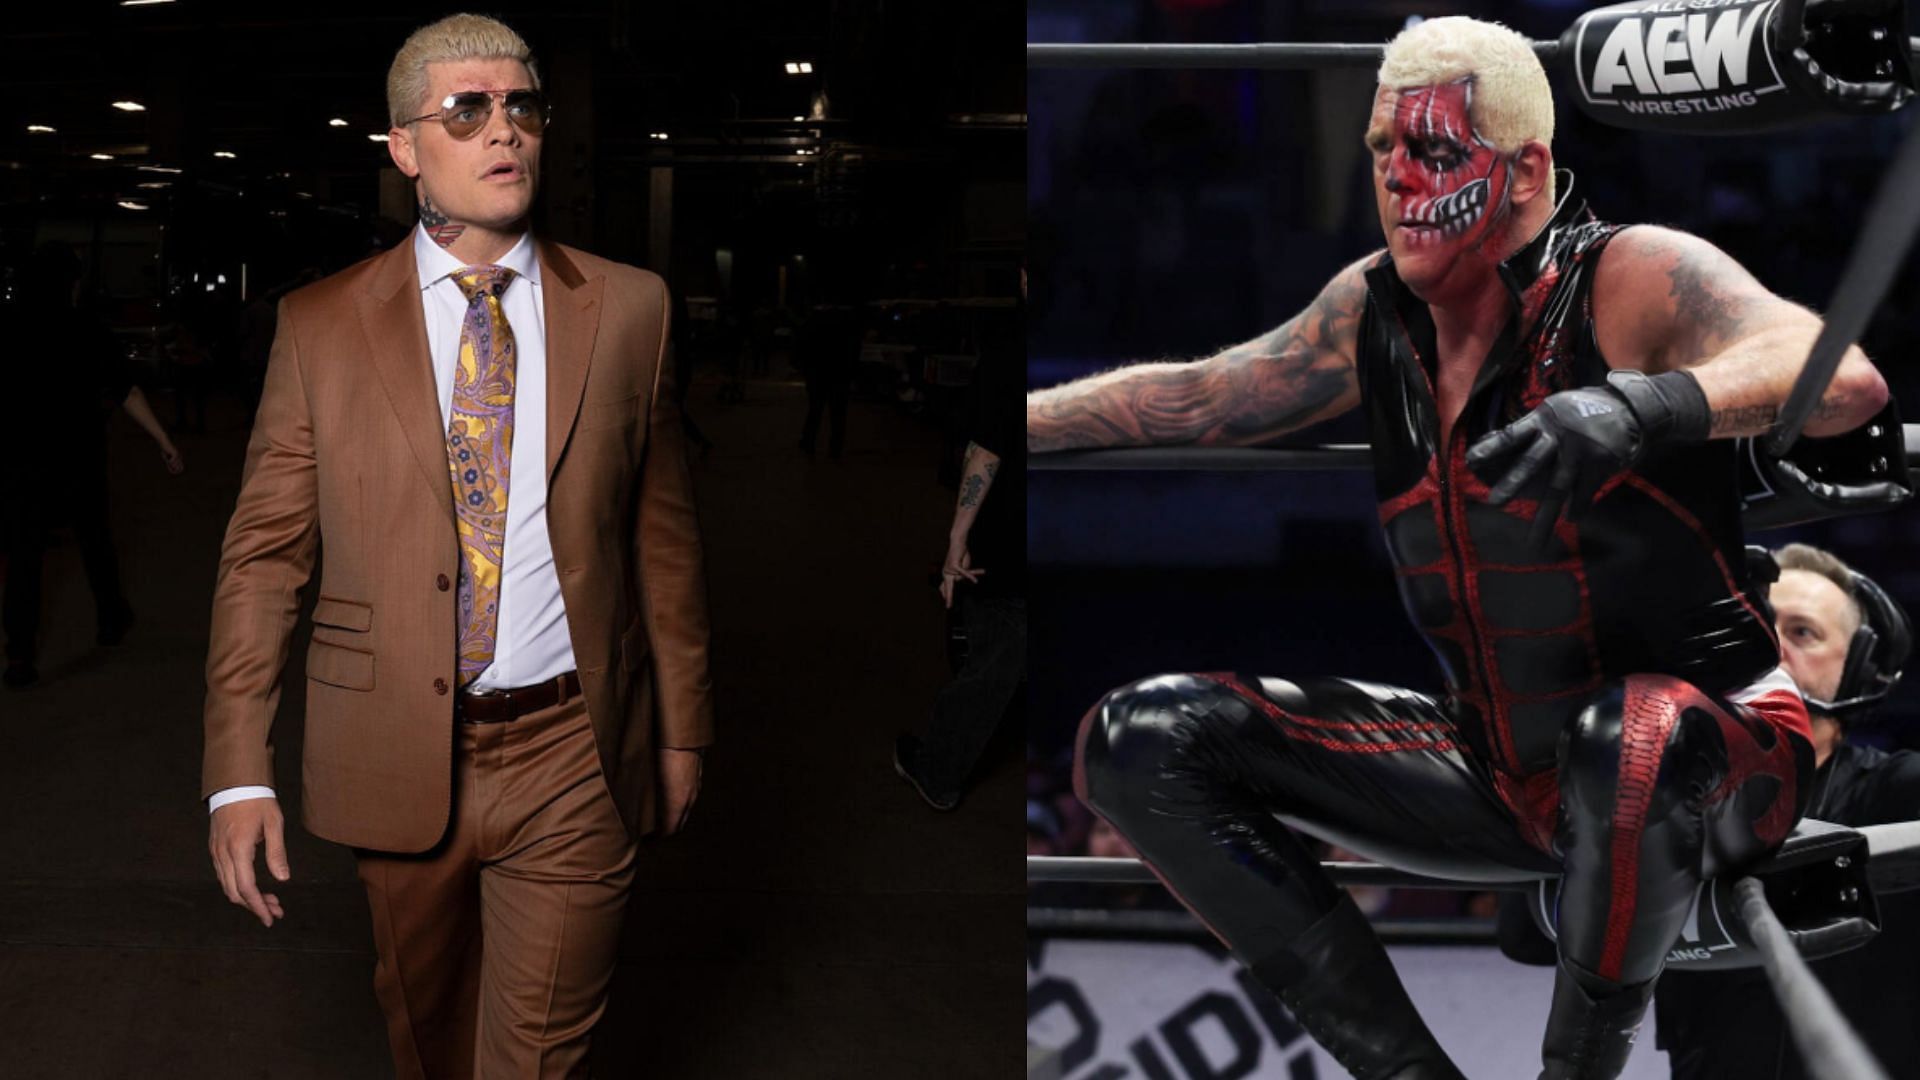 Dustin Rhodes is a former WWE superstar [Image Credits: WWE